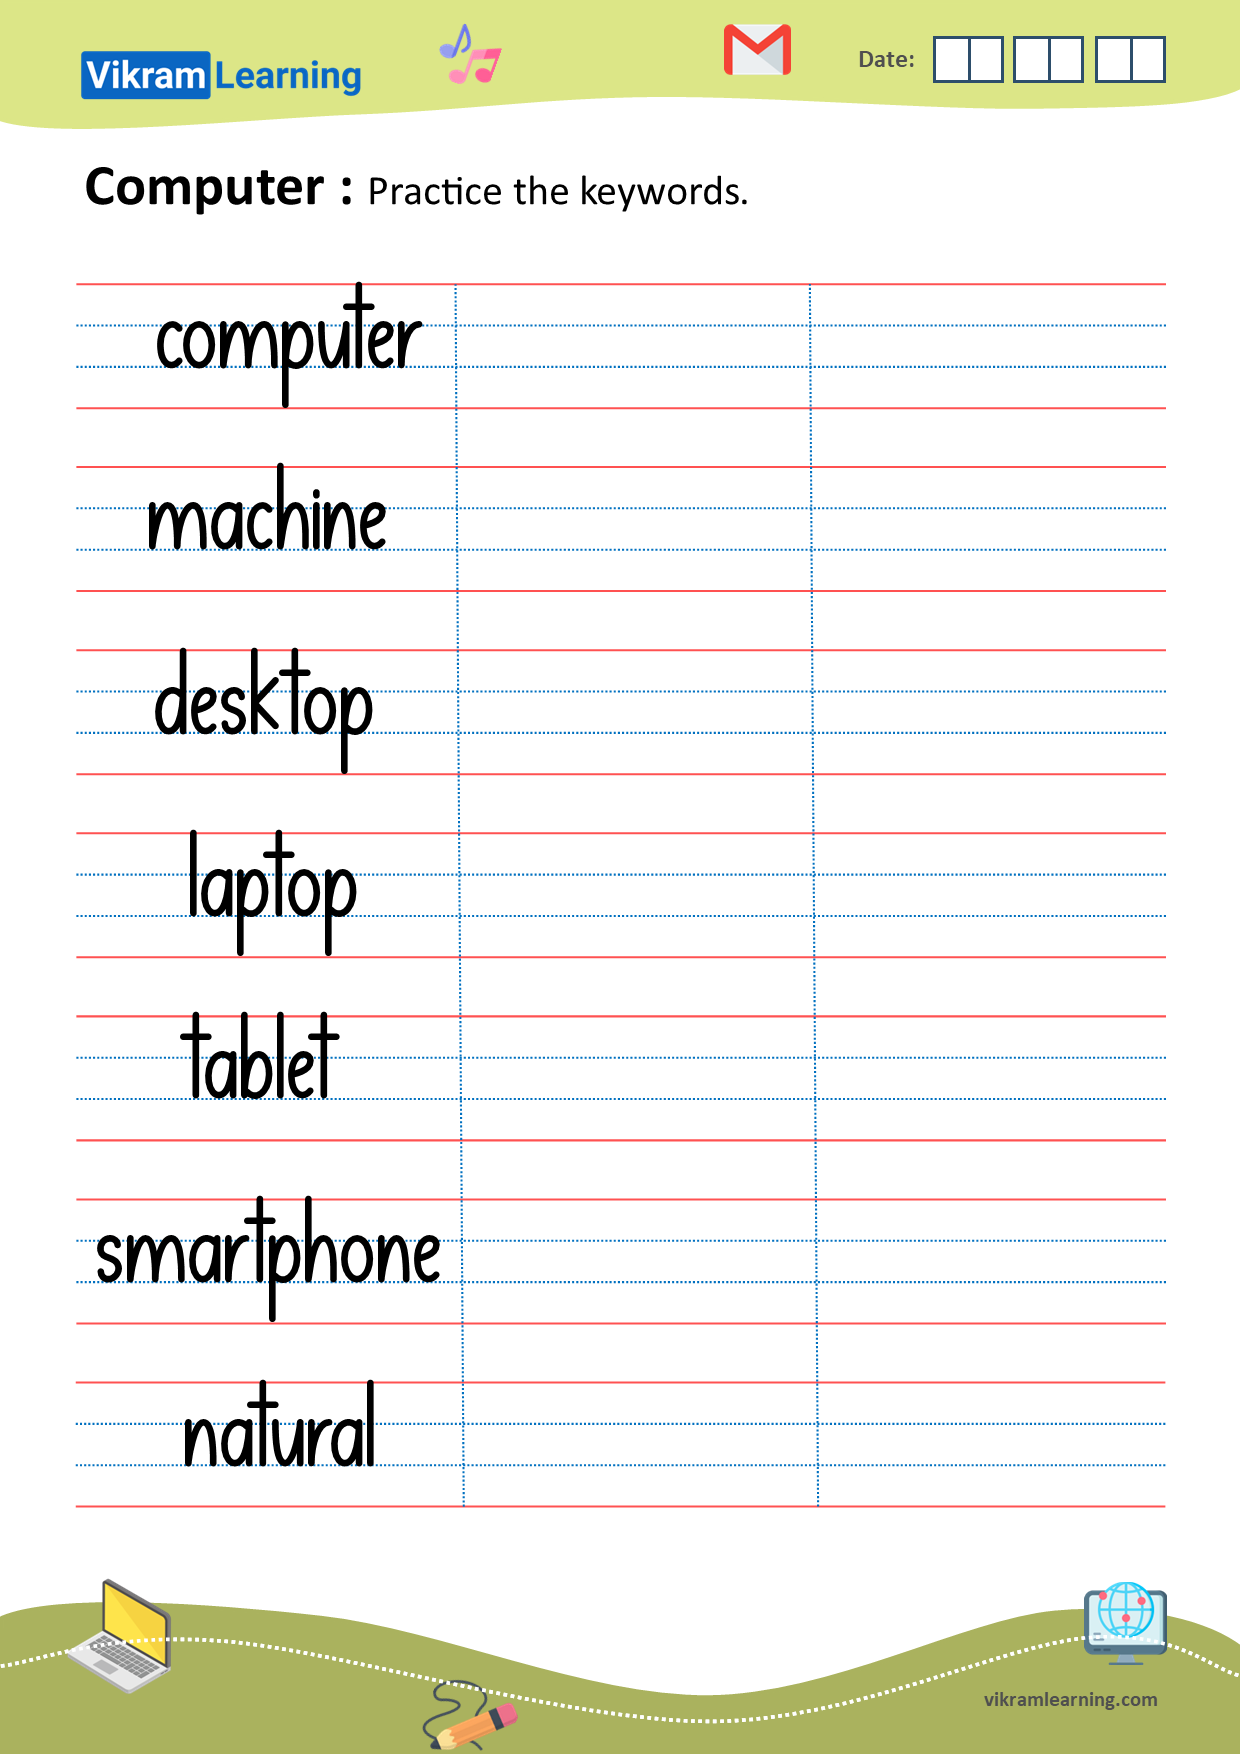 Download computer - a machine worksheets